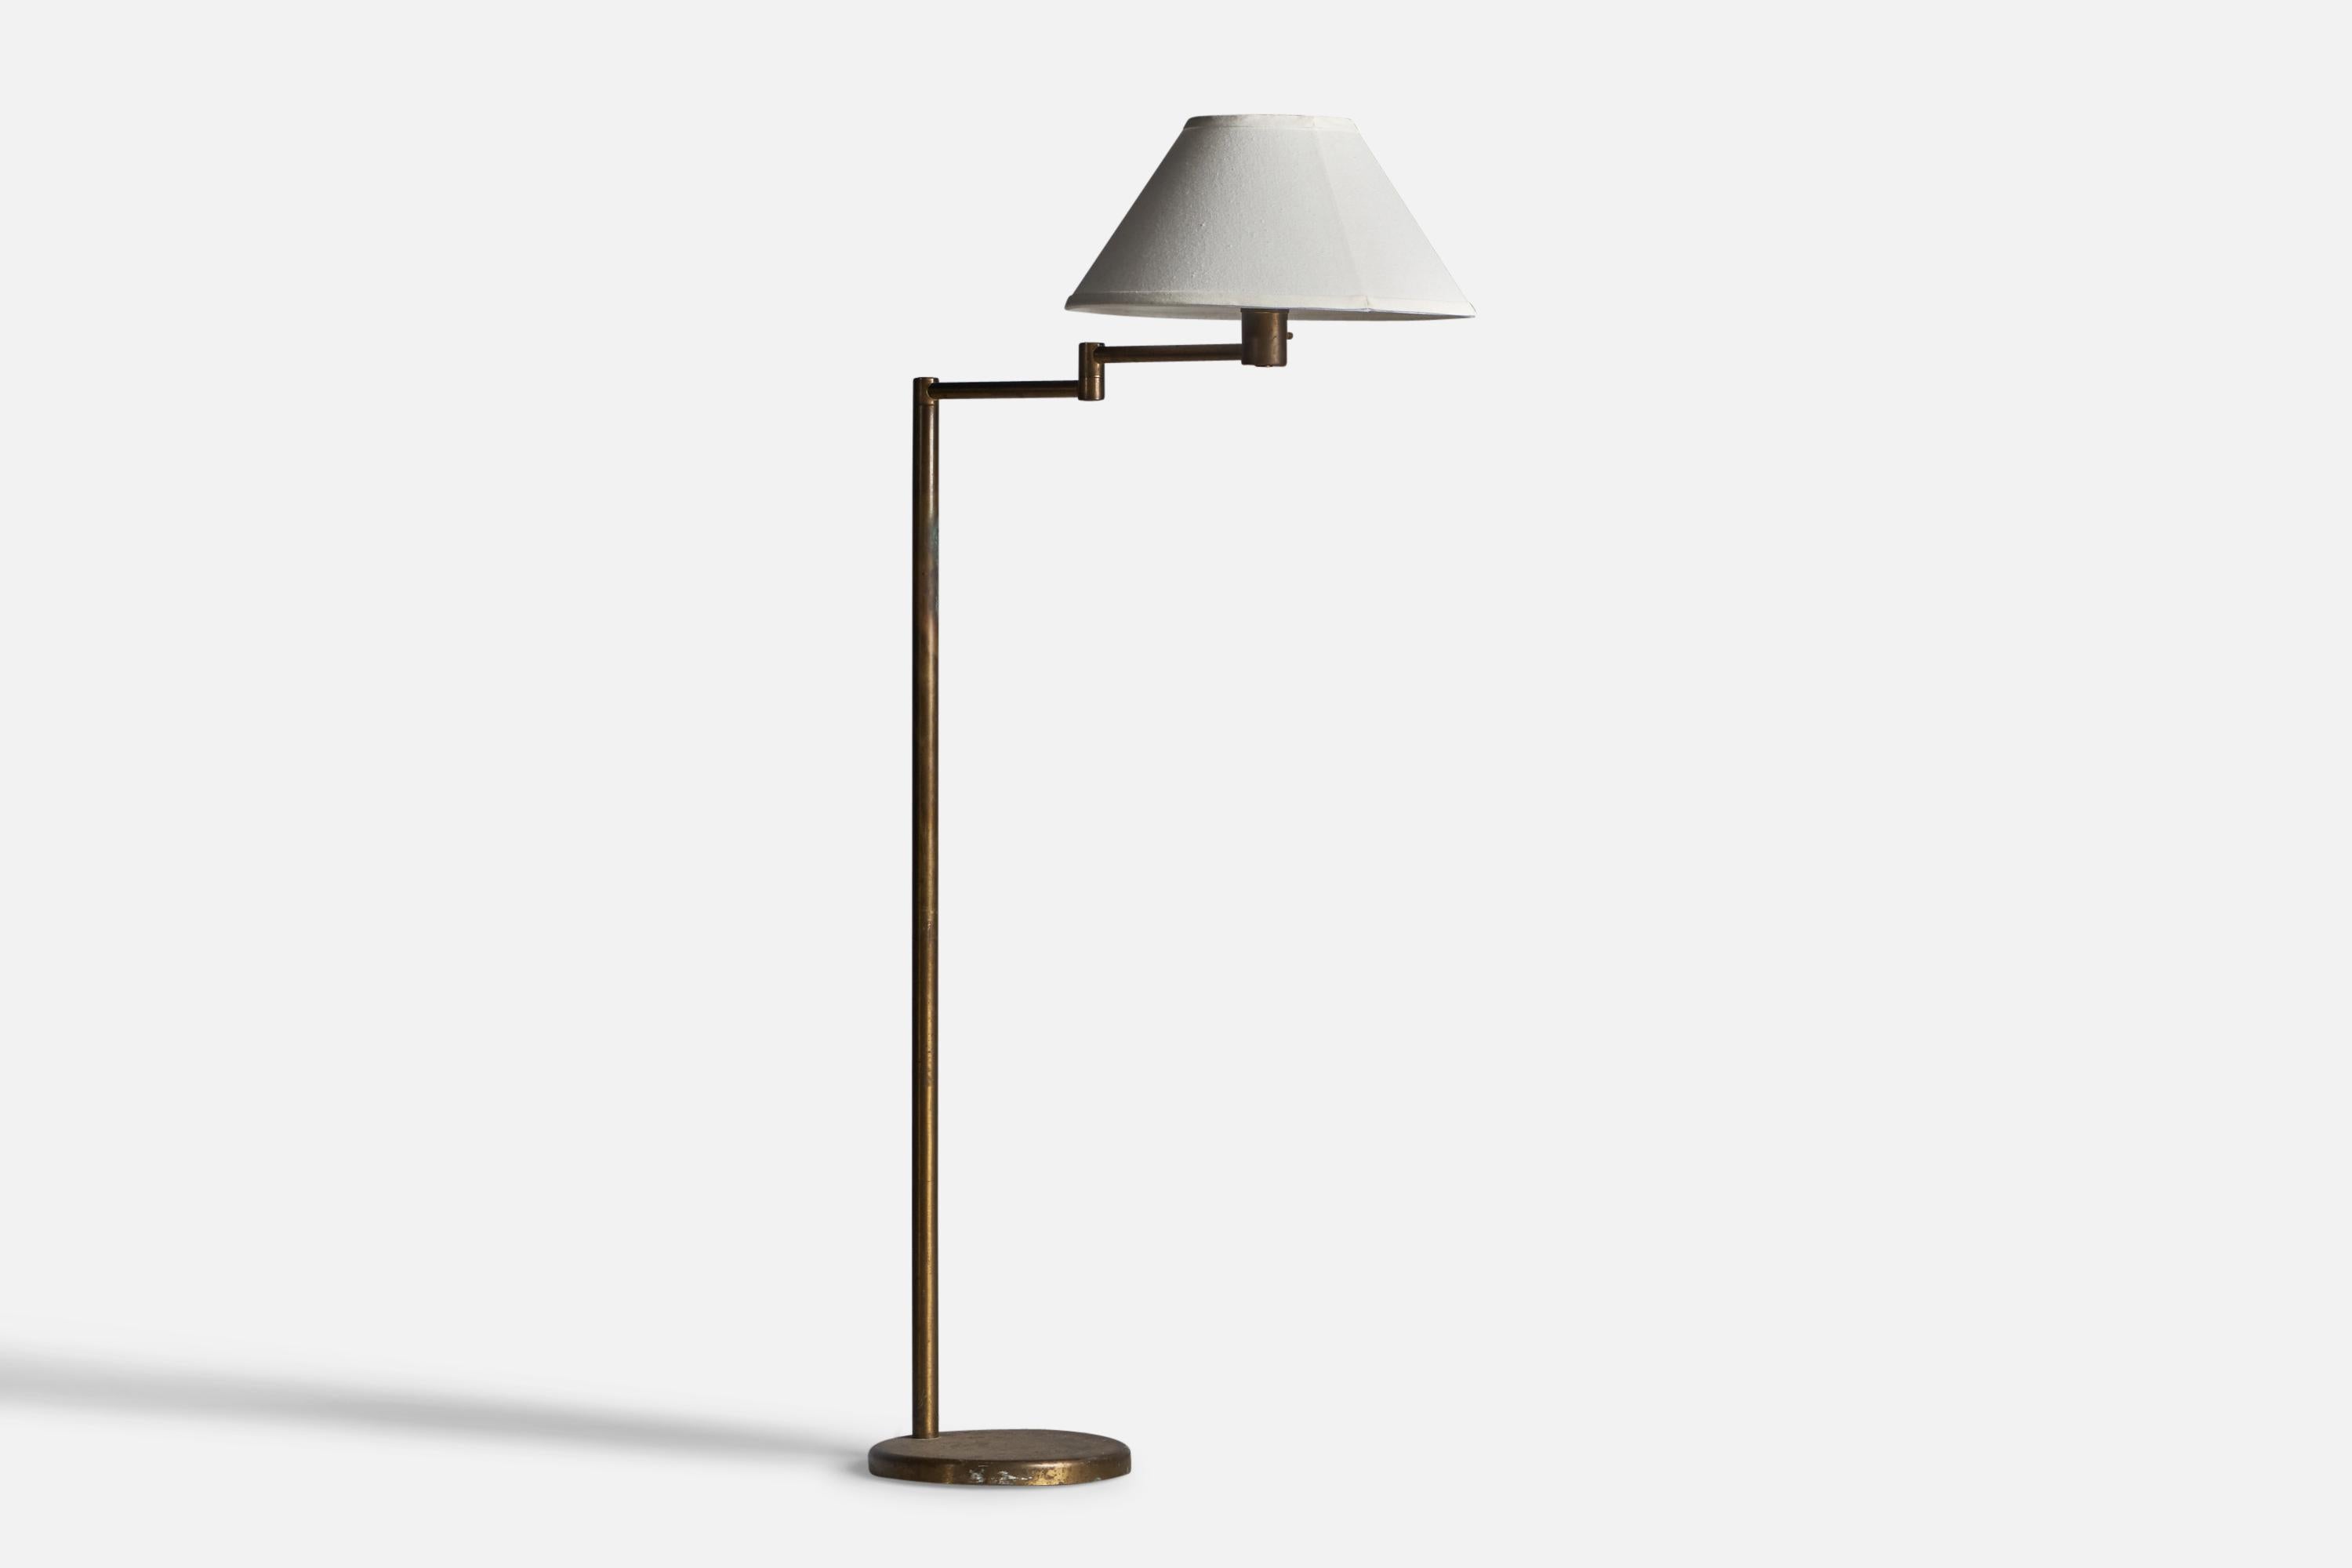 An adjustable brass and white fabric floor lamp designed and produced by Walter Van Nessen, USA, c. 1930s.

Overall Dimensions: 49